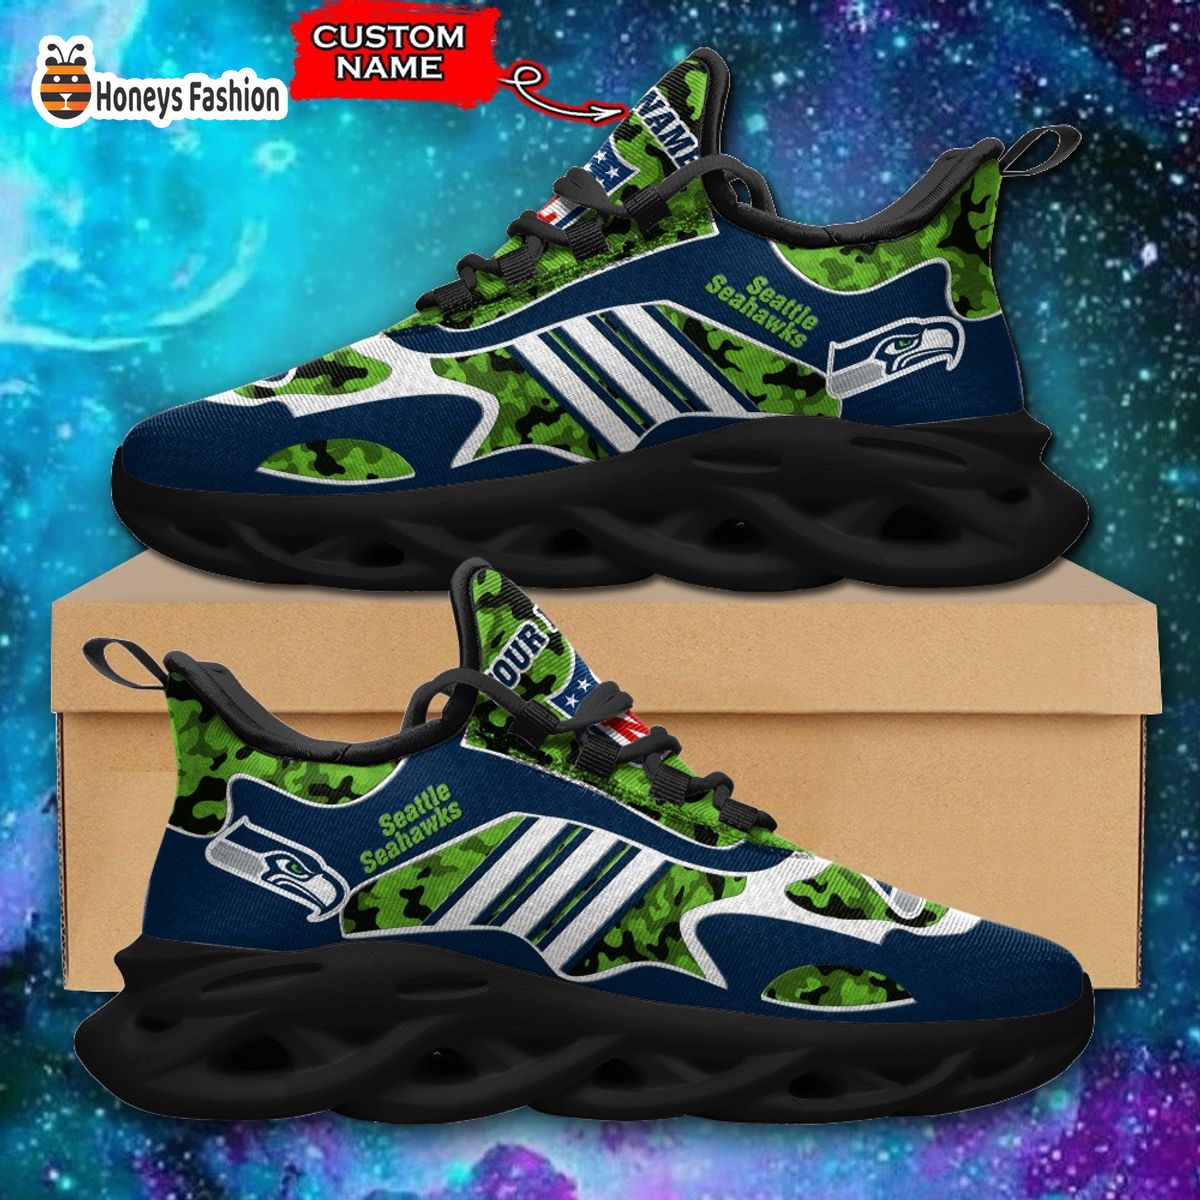 Seattle Seahawks NFL Adidas Personalized Max Soul Shoes